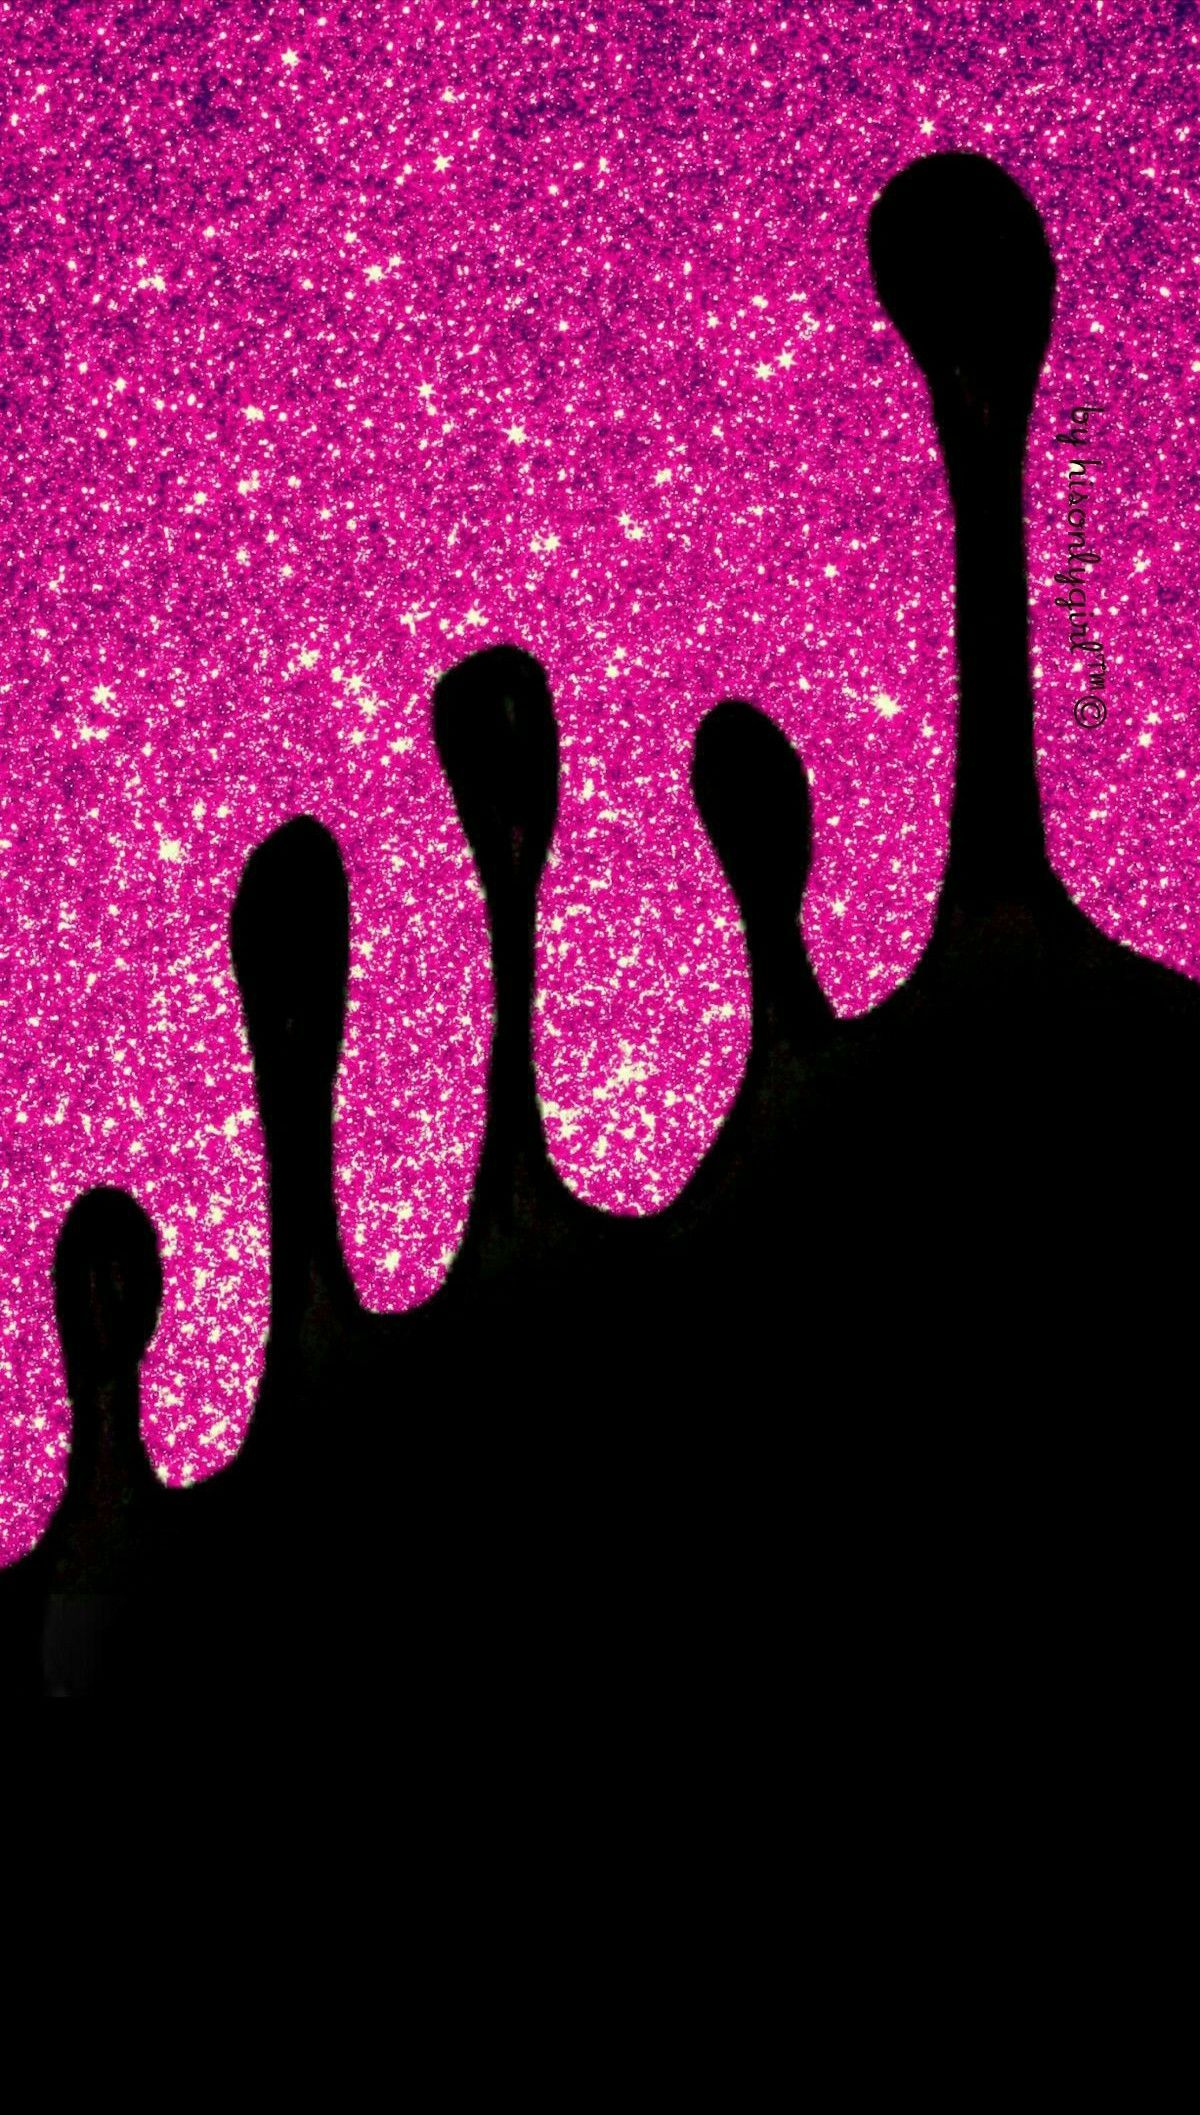 Dripping Pink glitter on black background - #Android and iPhone